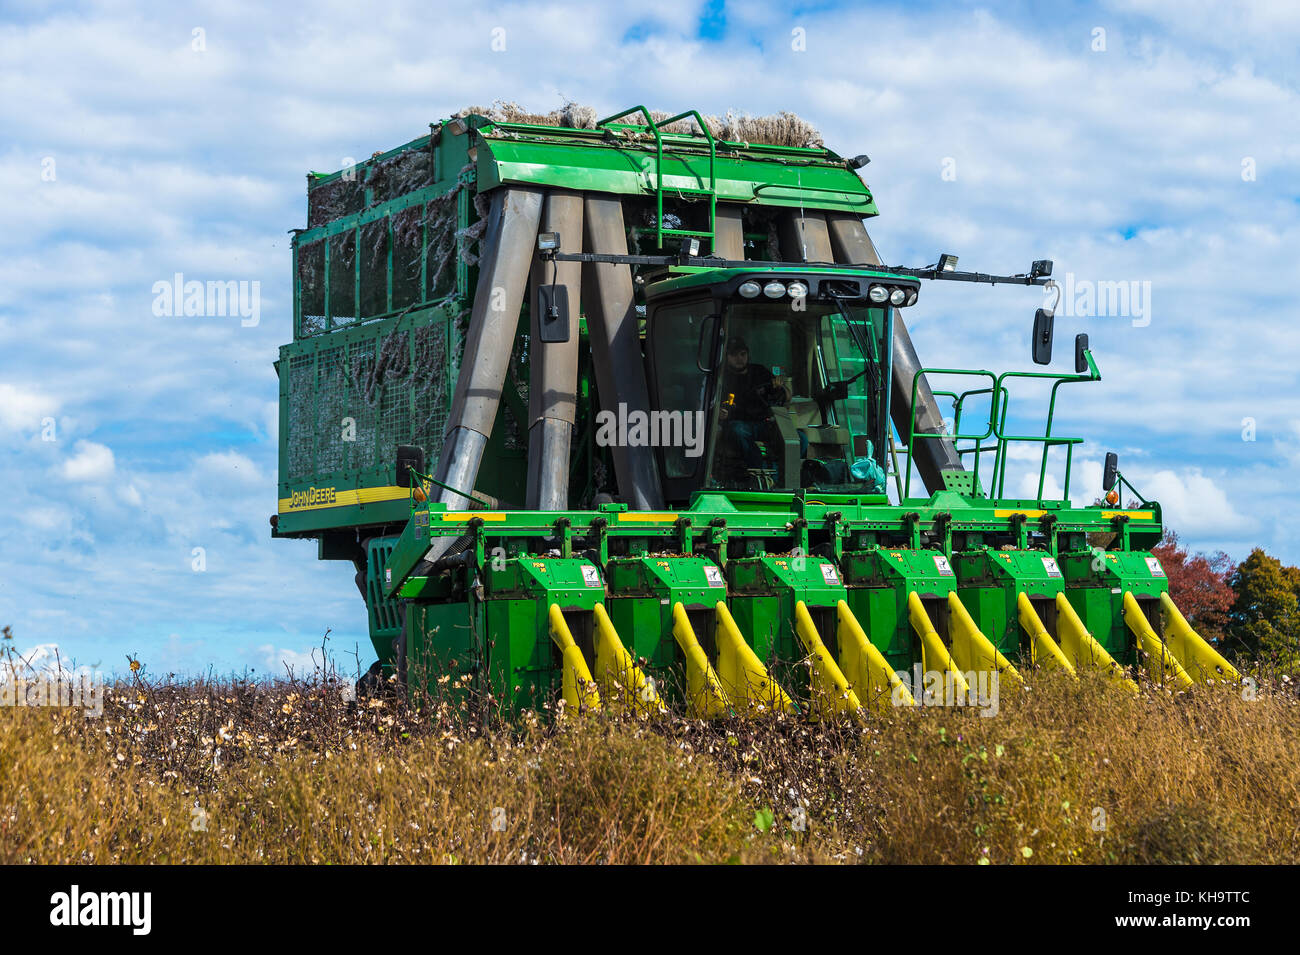 Skippers, Greensville County, Virginia,USA -November 2nd 2017; 'Spindle picker' type cotton harvesting machine, harvesting cotton Stock Photo